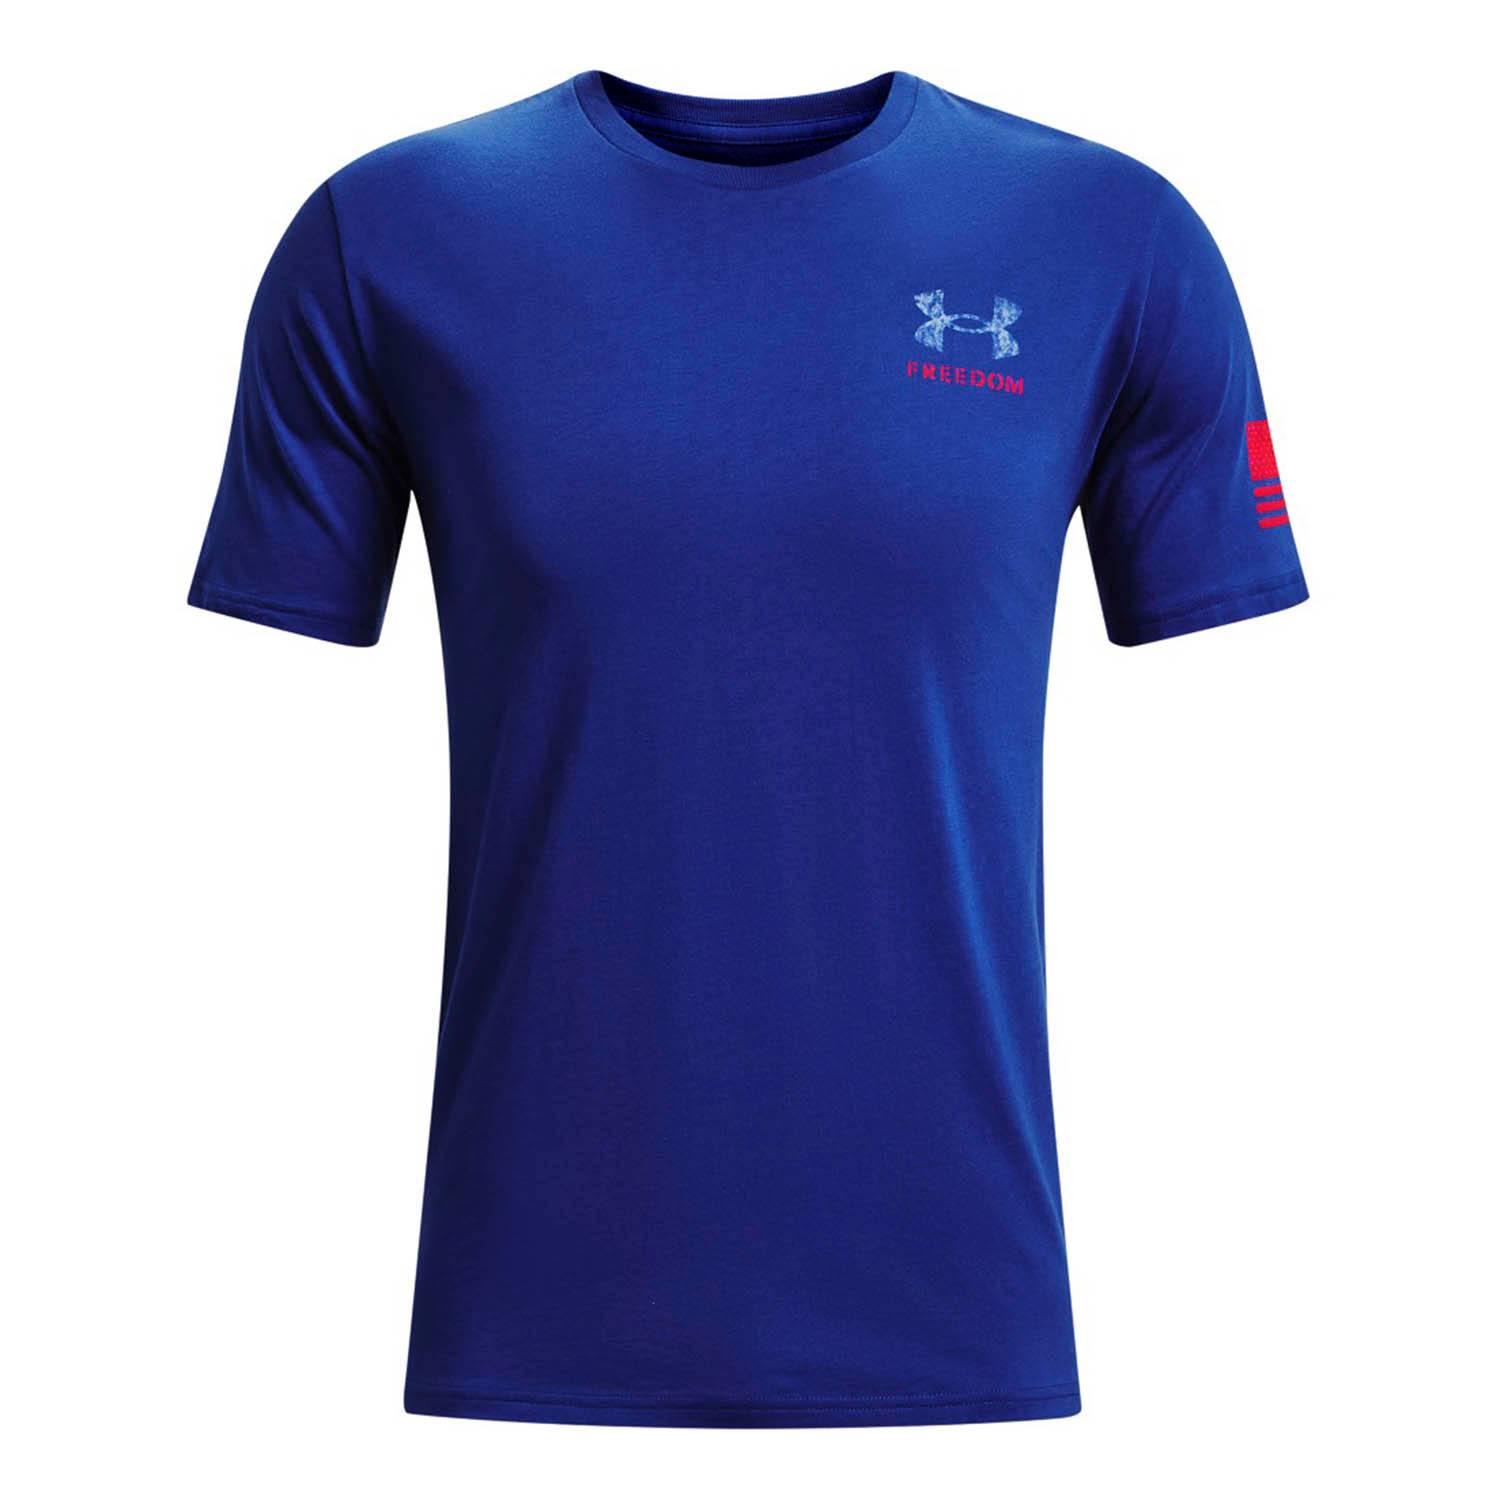 Under Armour Freedom by Air Graphic Tee